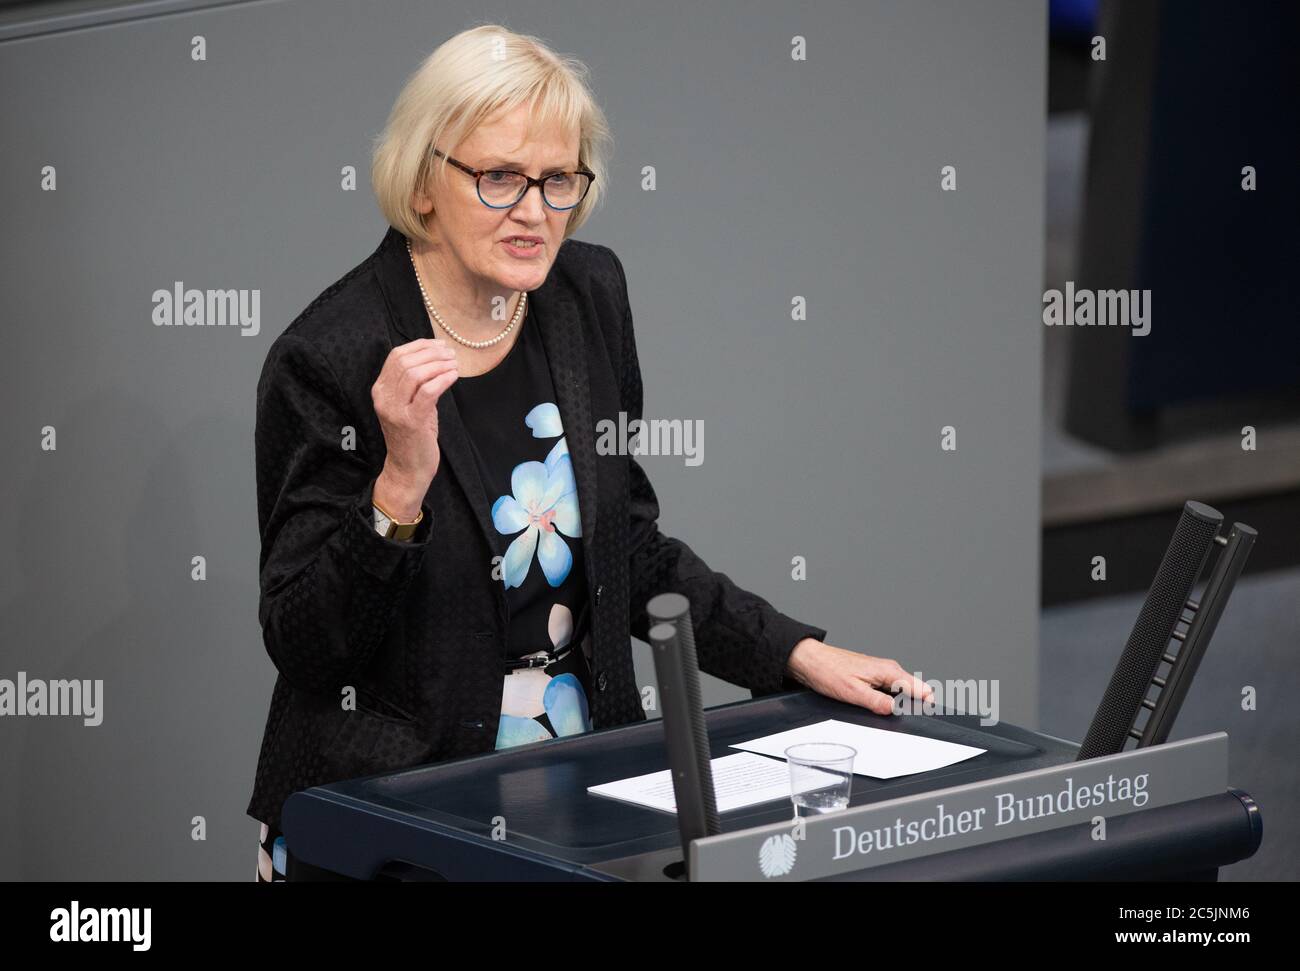 Berlin, Germany. 03rd July, 2020. Ursula Schulte (SPD) speaks in the plenary session of the German Bundestag. The main topics of the 171st session of the 19th legislative period are the adoption of the Coal Exit Act, a topical hour on the excesses of violence in Stuttgart, as well as debates on electoral law reform, the protection of electronic patient data, the welfare of farm animals and the German chairmanship of the UN Security Council. Credit: Christophe Gateau/dpa/Alamy Live News Stock Photo